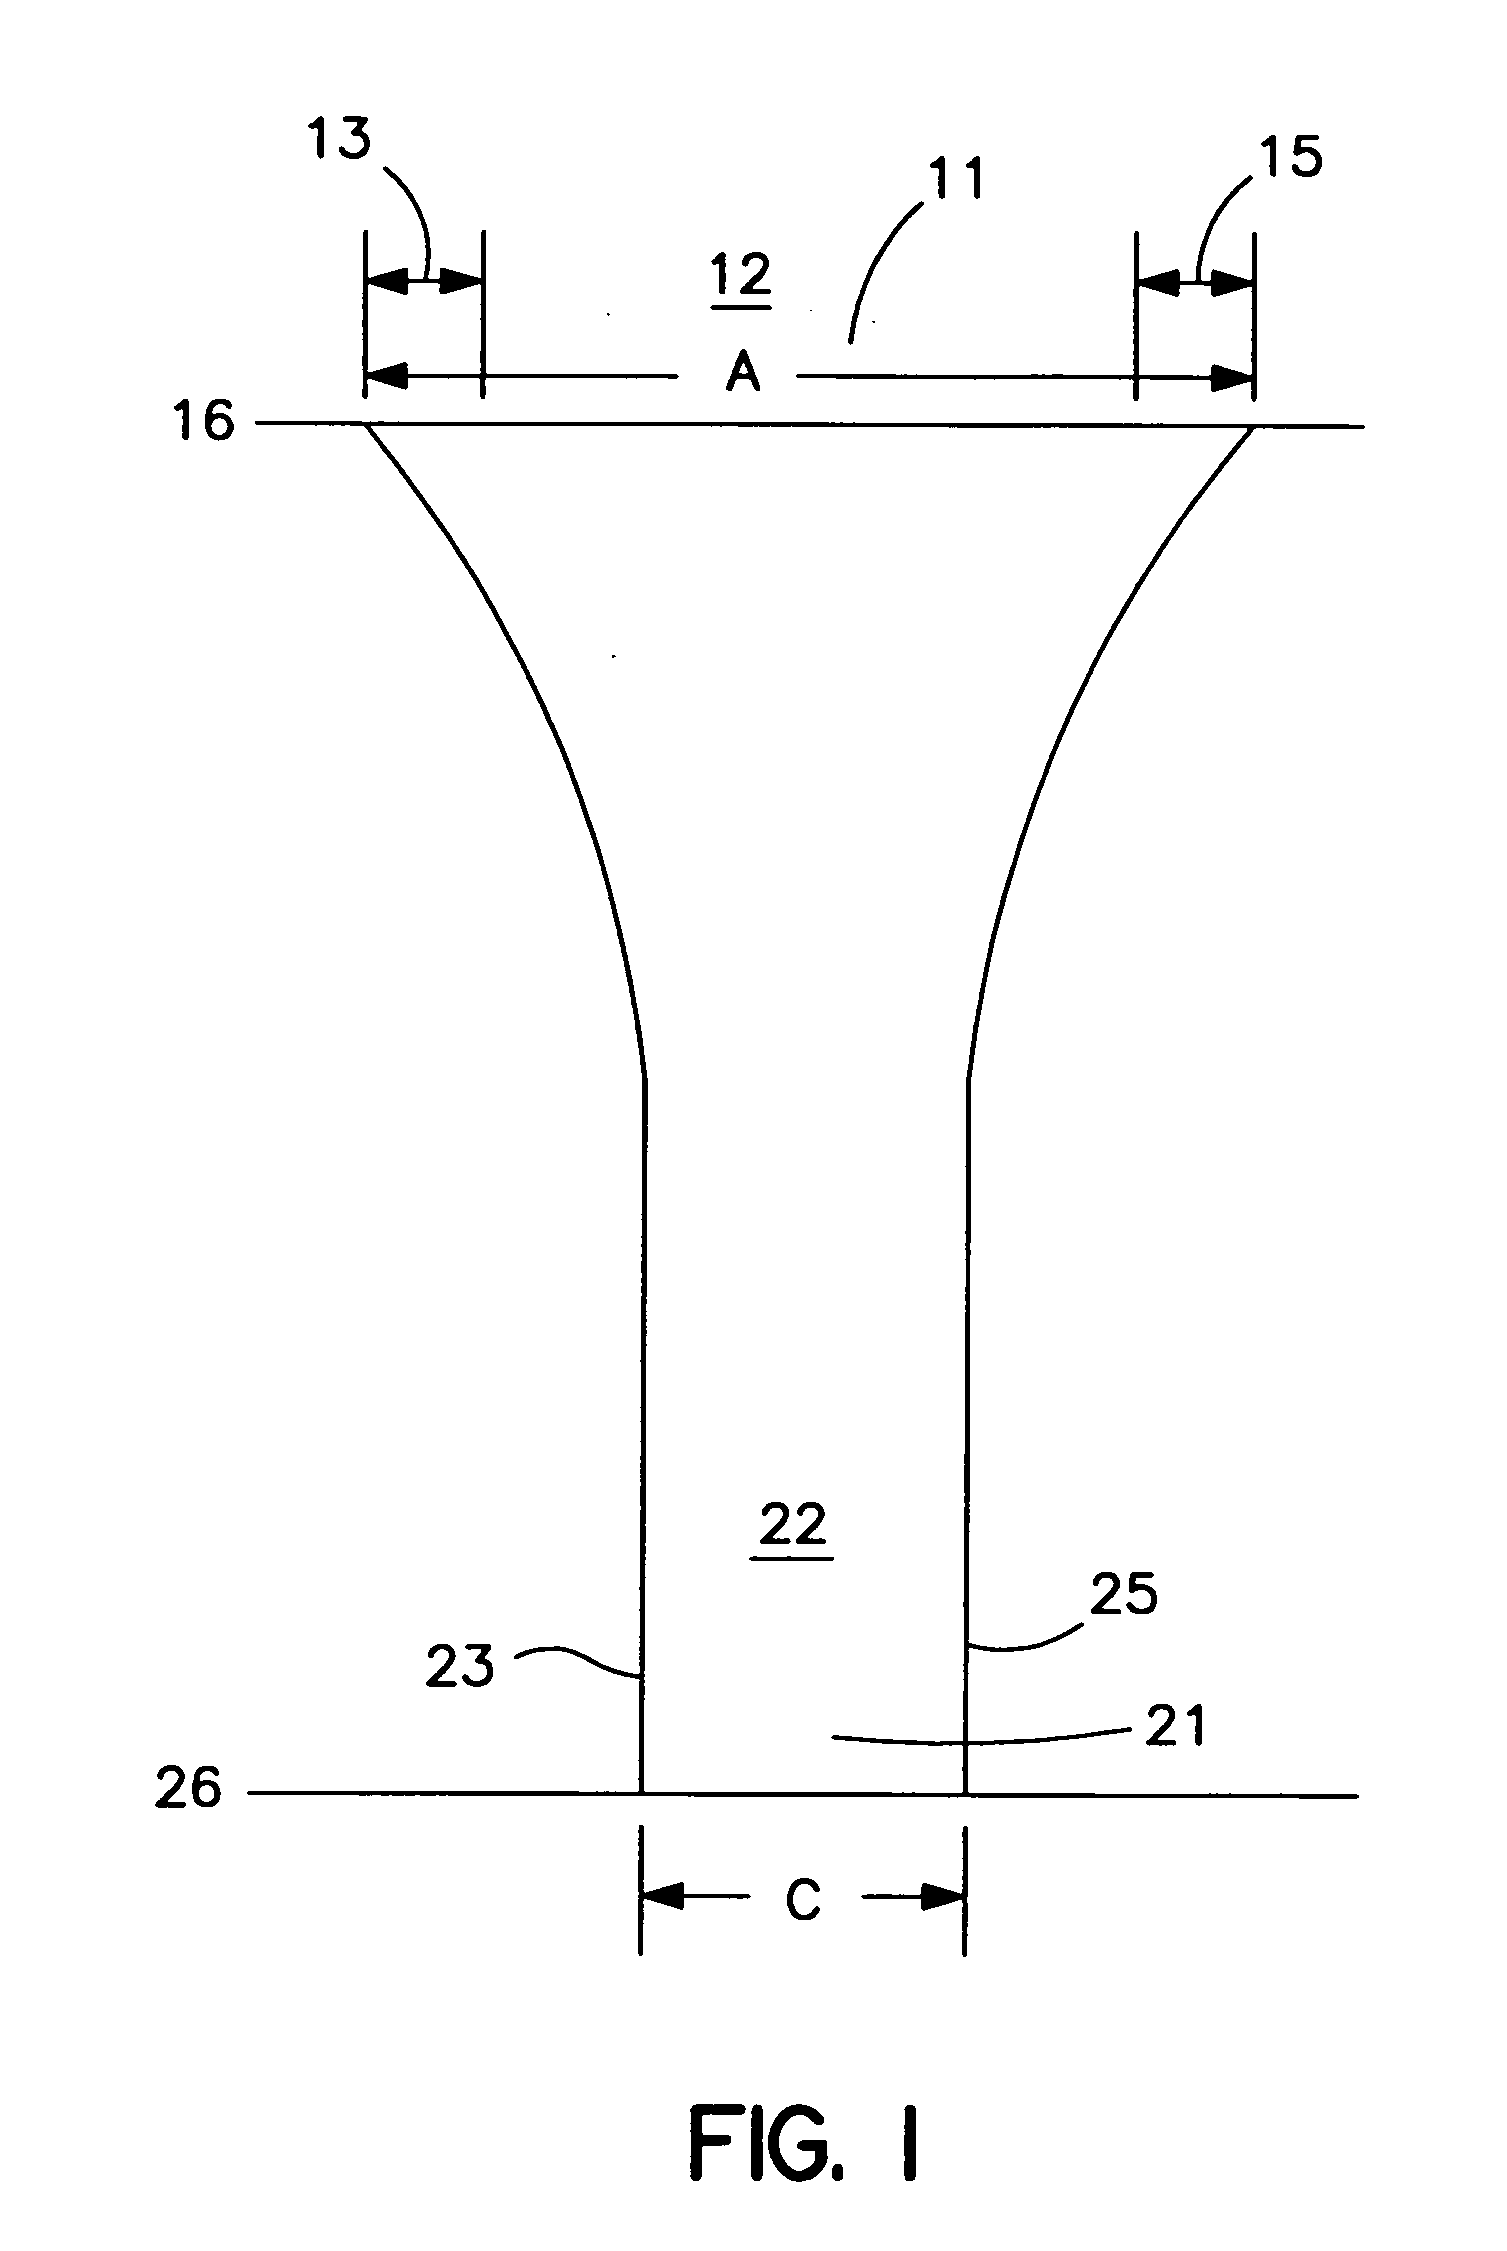 Process for making necked nonwoven webs having improved cross-directional uniformity